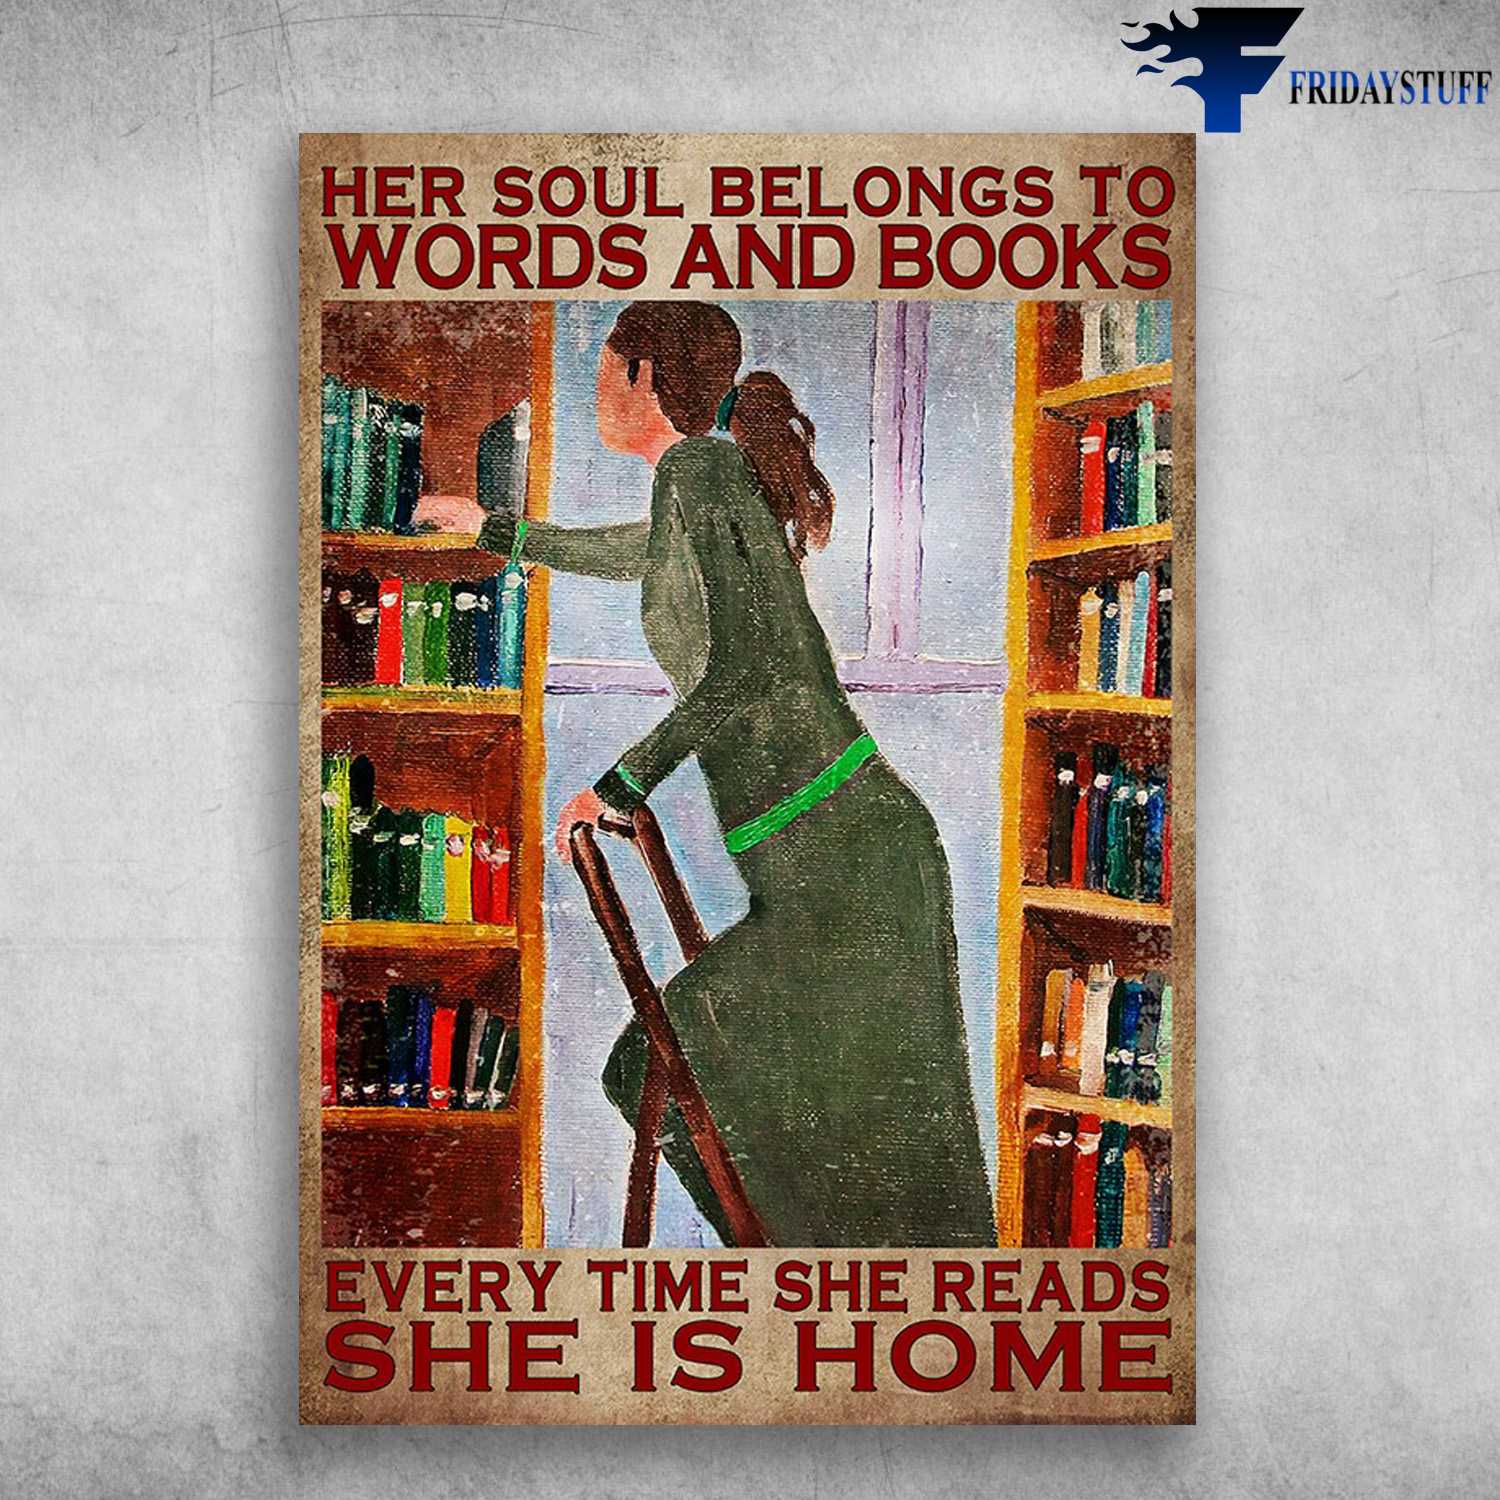 Girl Loves Books - Her Soul Belongs To Words And Books, Every Time She Reads, She Is Home